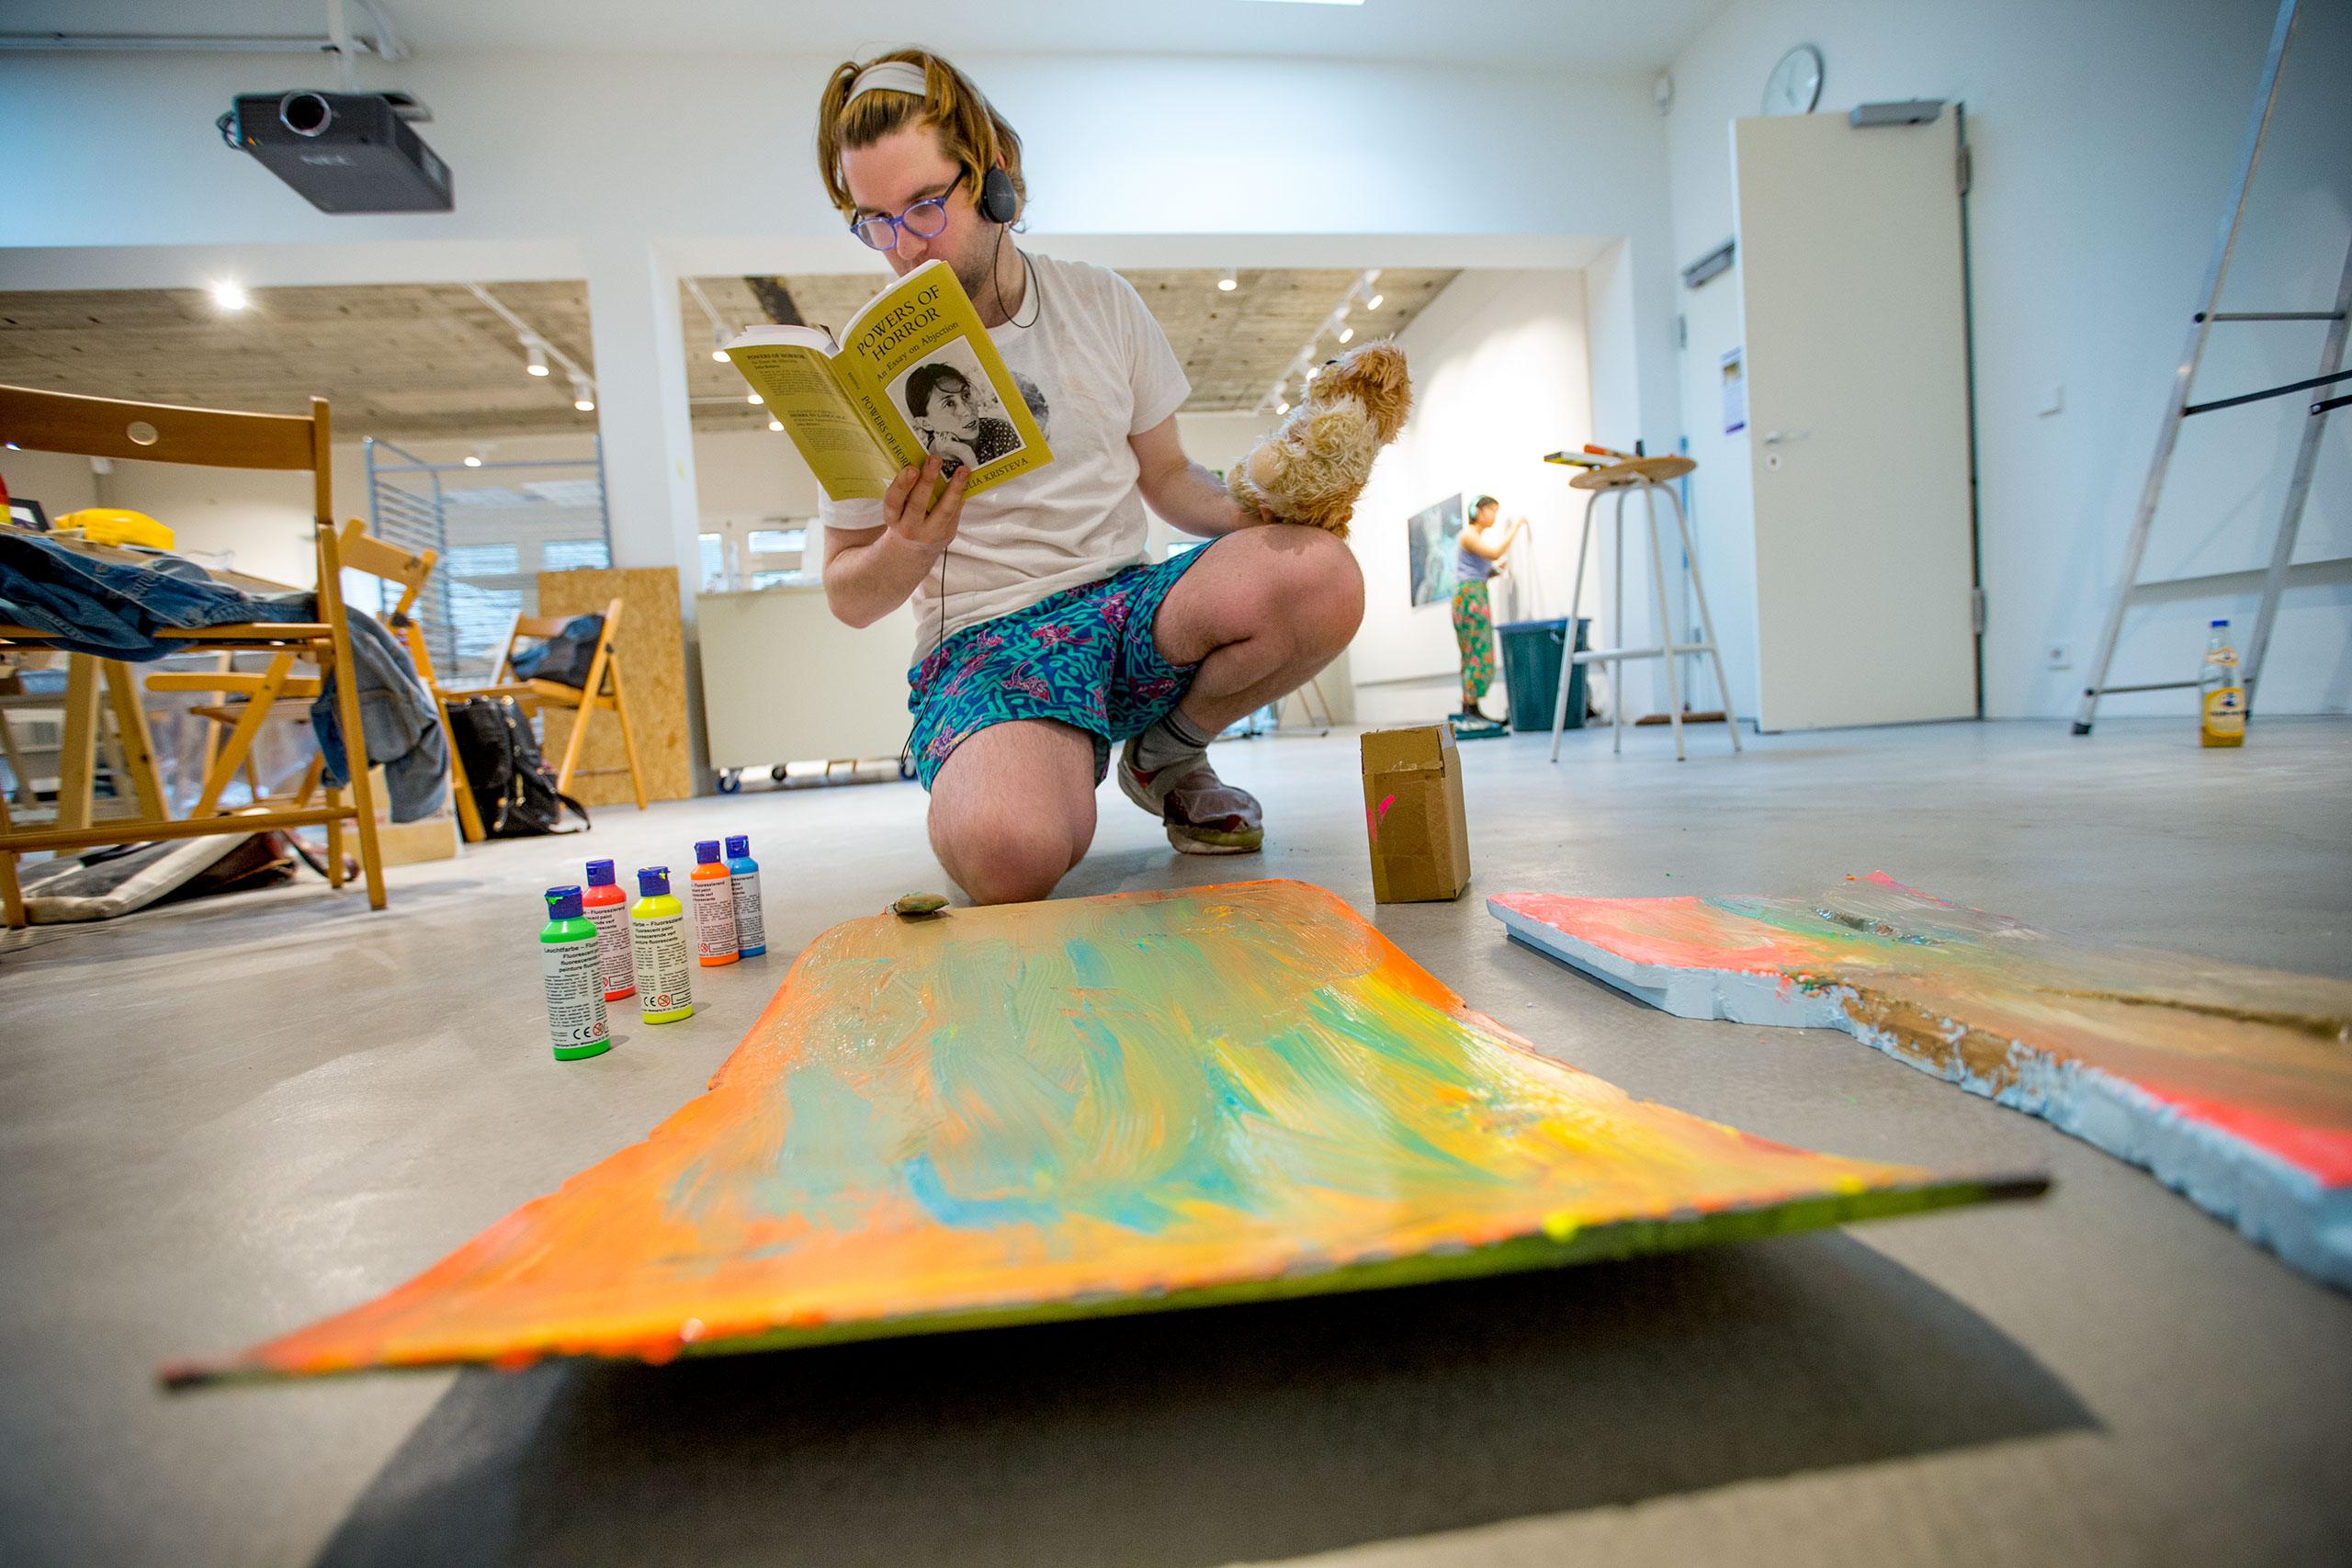 A student studying art abroad reads from a book while crouched over his painting on the floor